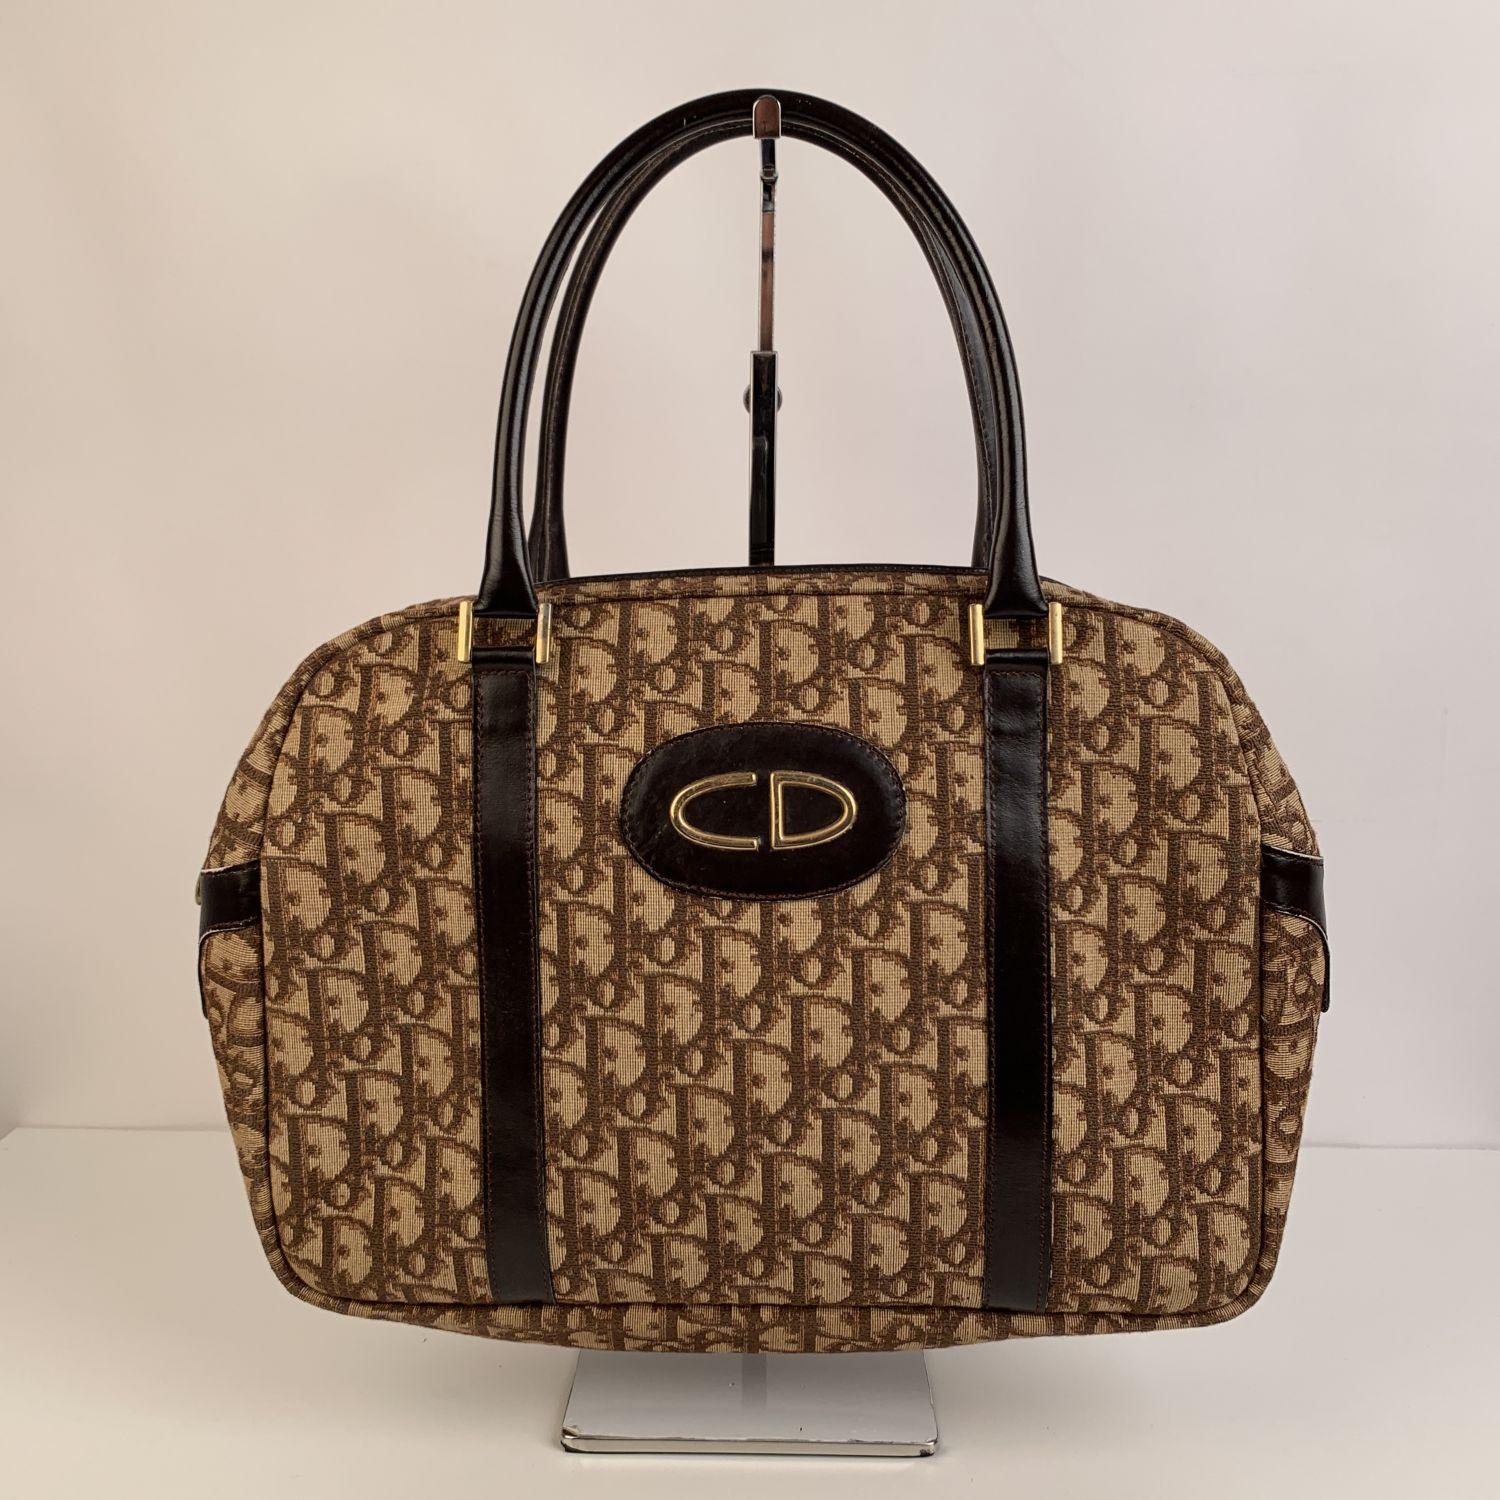 Vintage CHRISTIAN DIOR satchel bag crafted in brown tapestry monogram 'Diorissimo' canvas with dark brown genuine leather trim. Upper zipper closure. Brown leather lining. 2 side open pockets inside. 'CHRISTIAN DIOR - Made in France' embossed